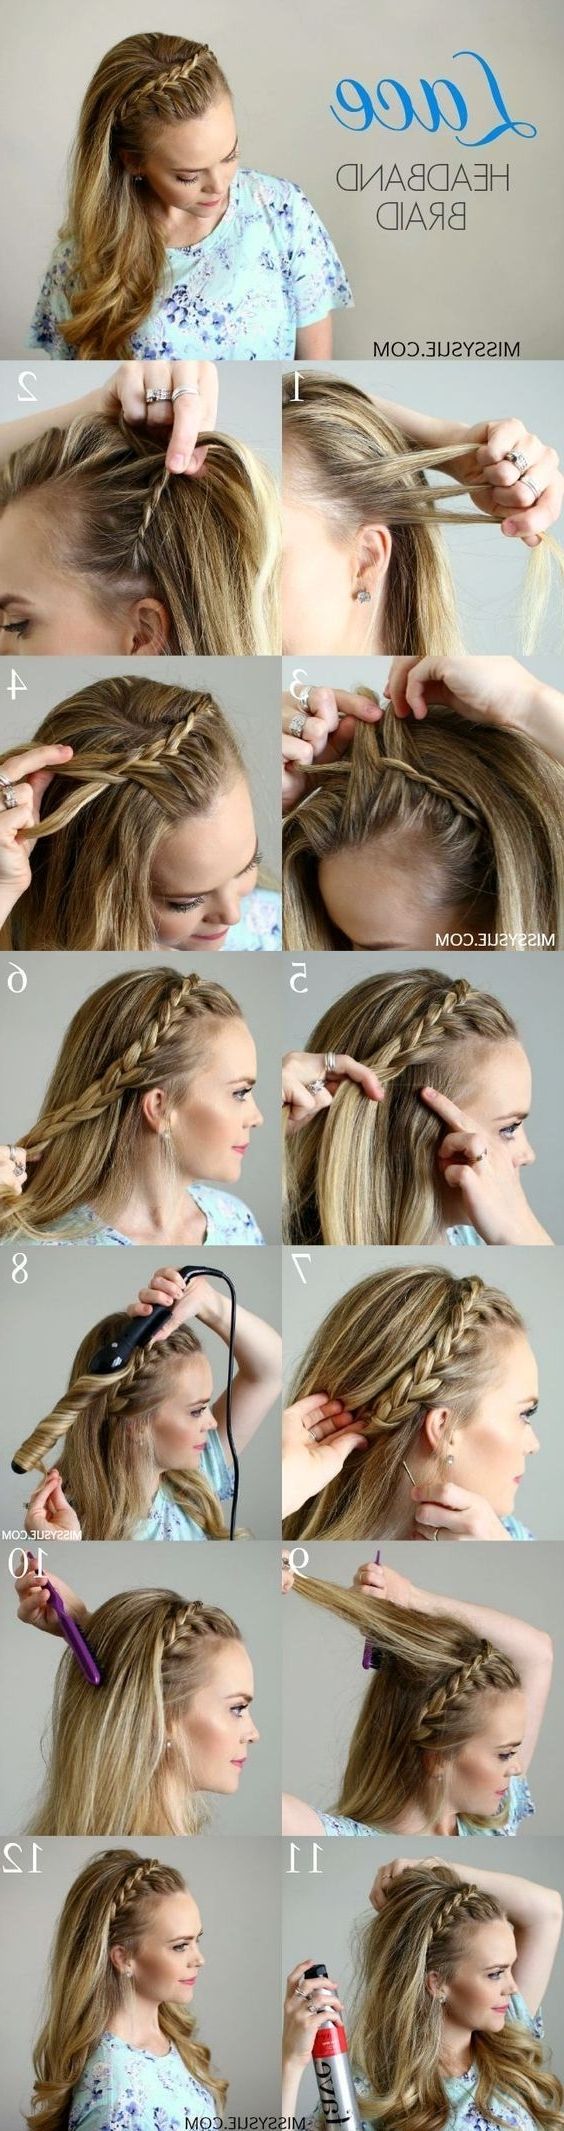 Super Easy Diy Braided Hairstyles For Wedding Tutorials (View 2 of 15)